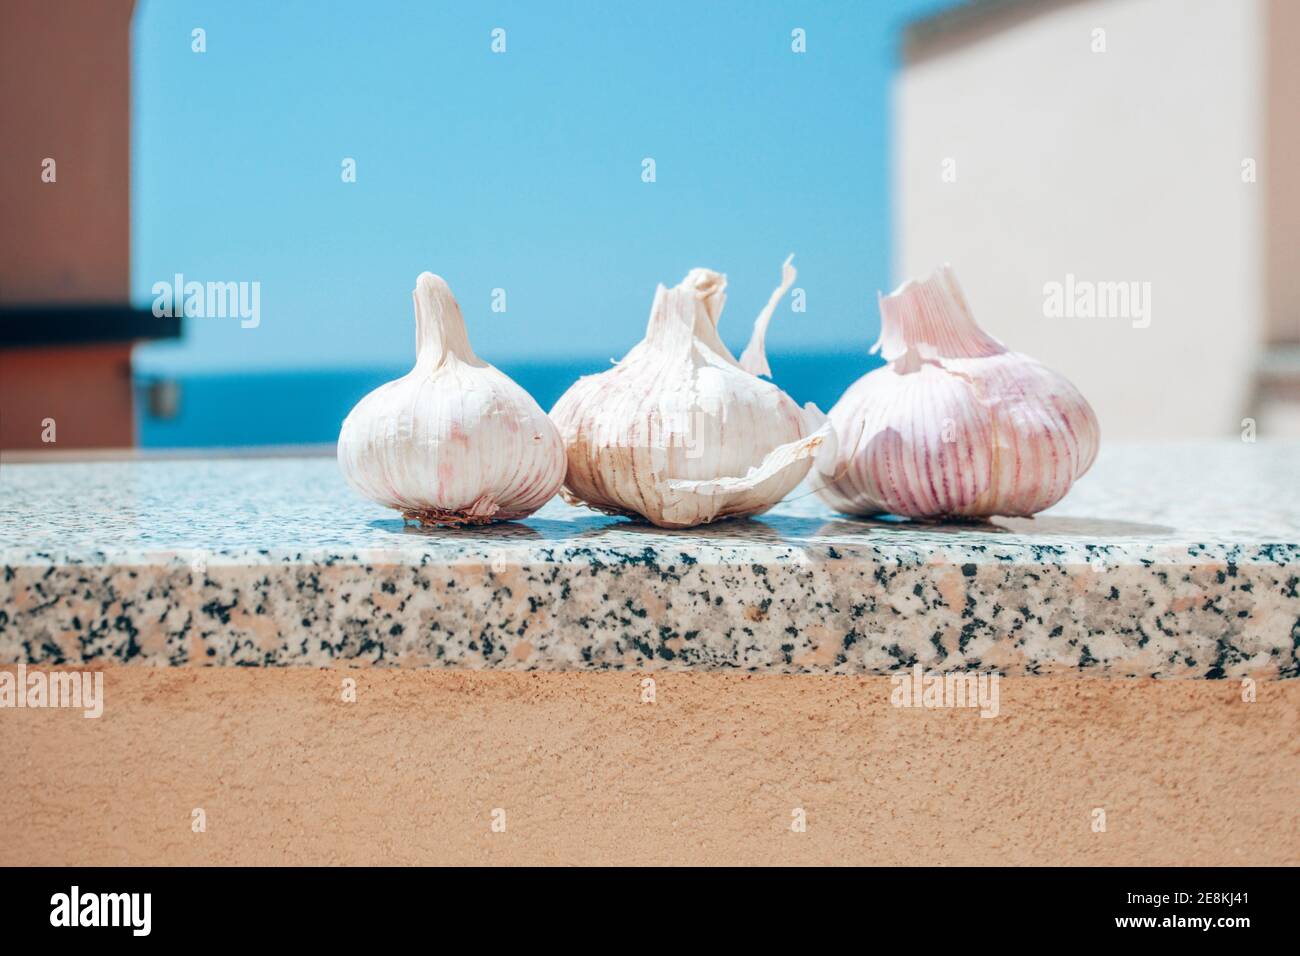 Conceptual realism: three garlic raw heads on architectural marble podium against sea under the sun Stock Photo